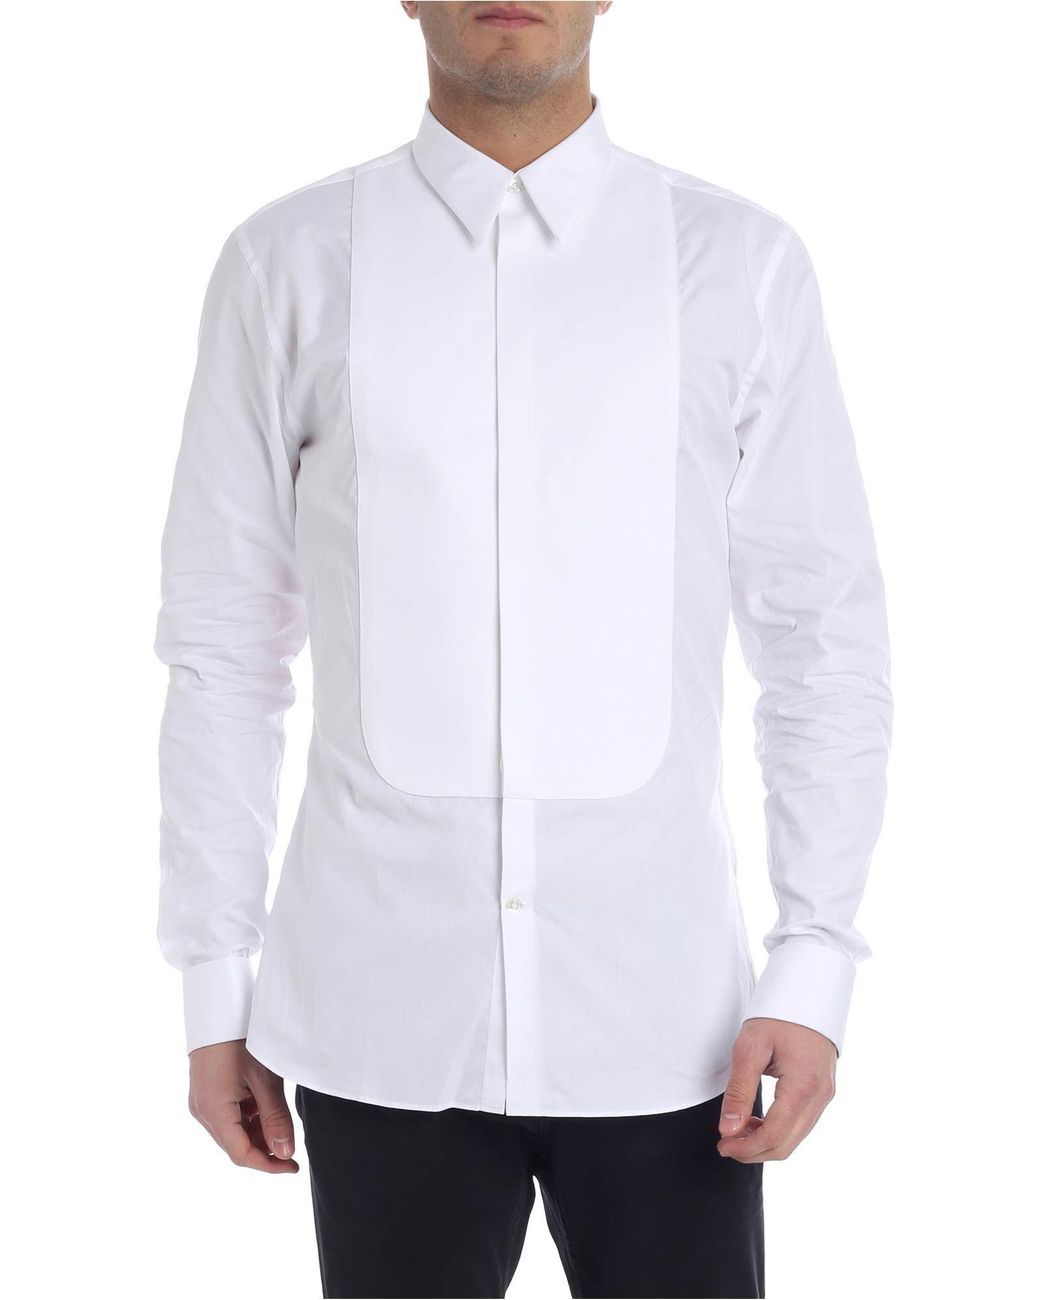 Givenchy Cotton White Slim Fit Shirt With Plastron for Men - Lyst